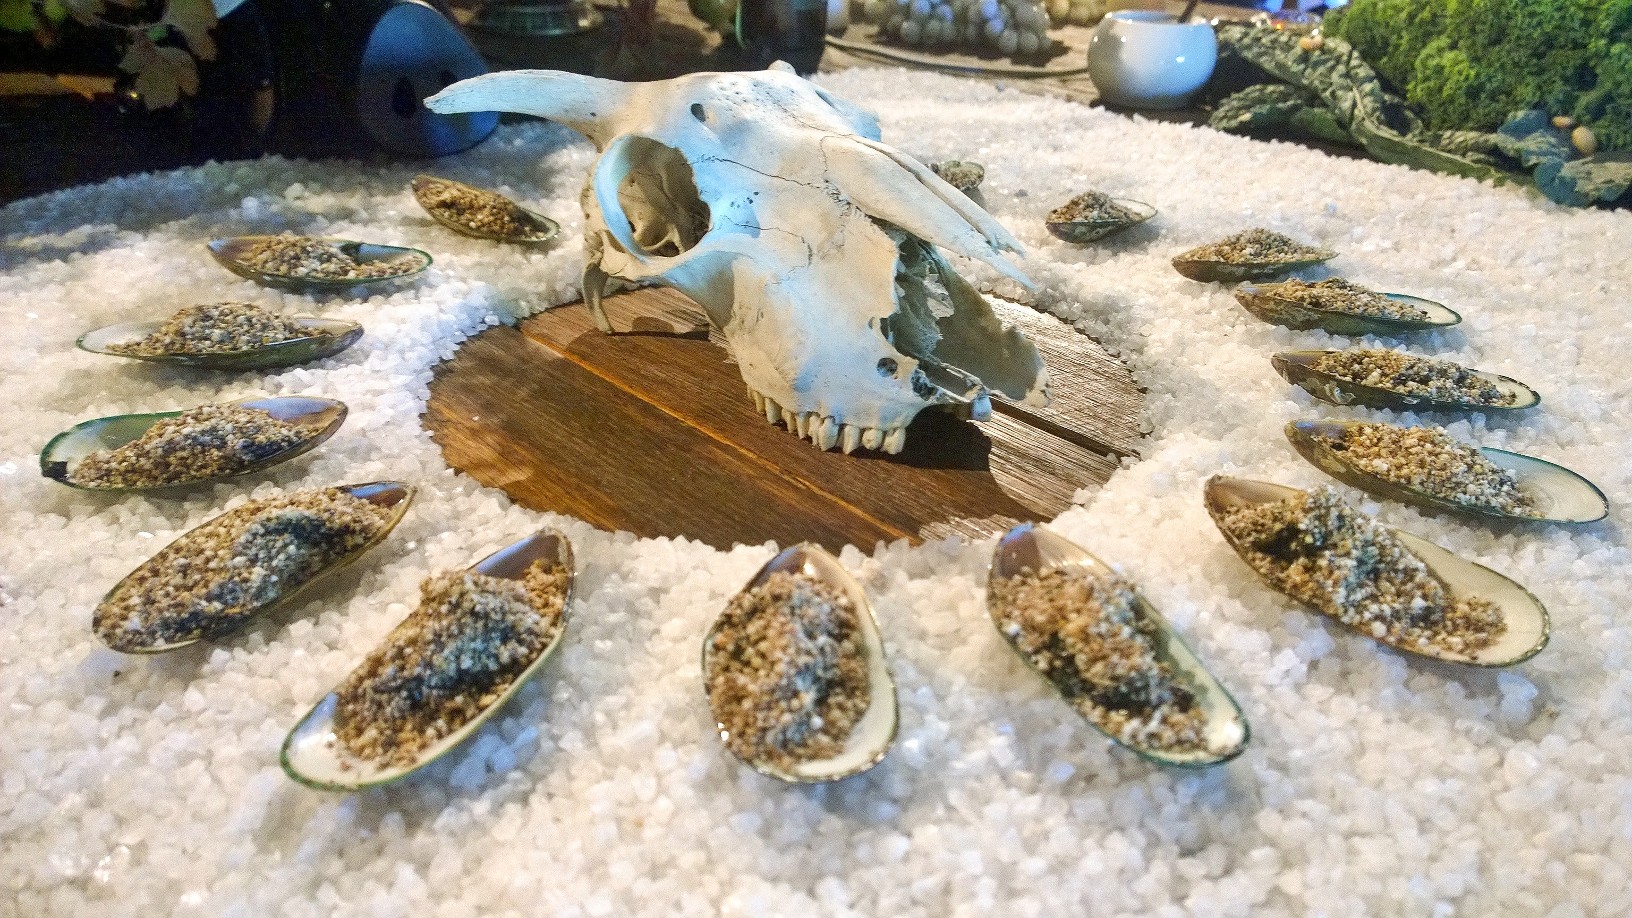 Oysters, Black Seafood and edible Sand